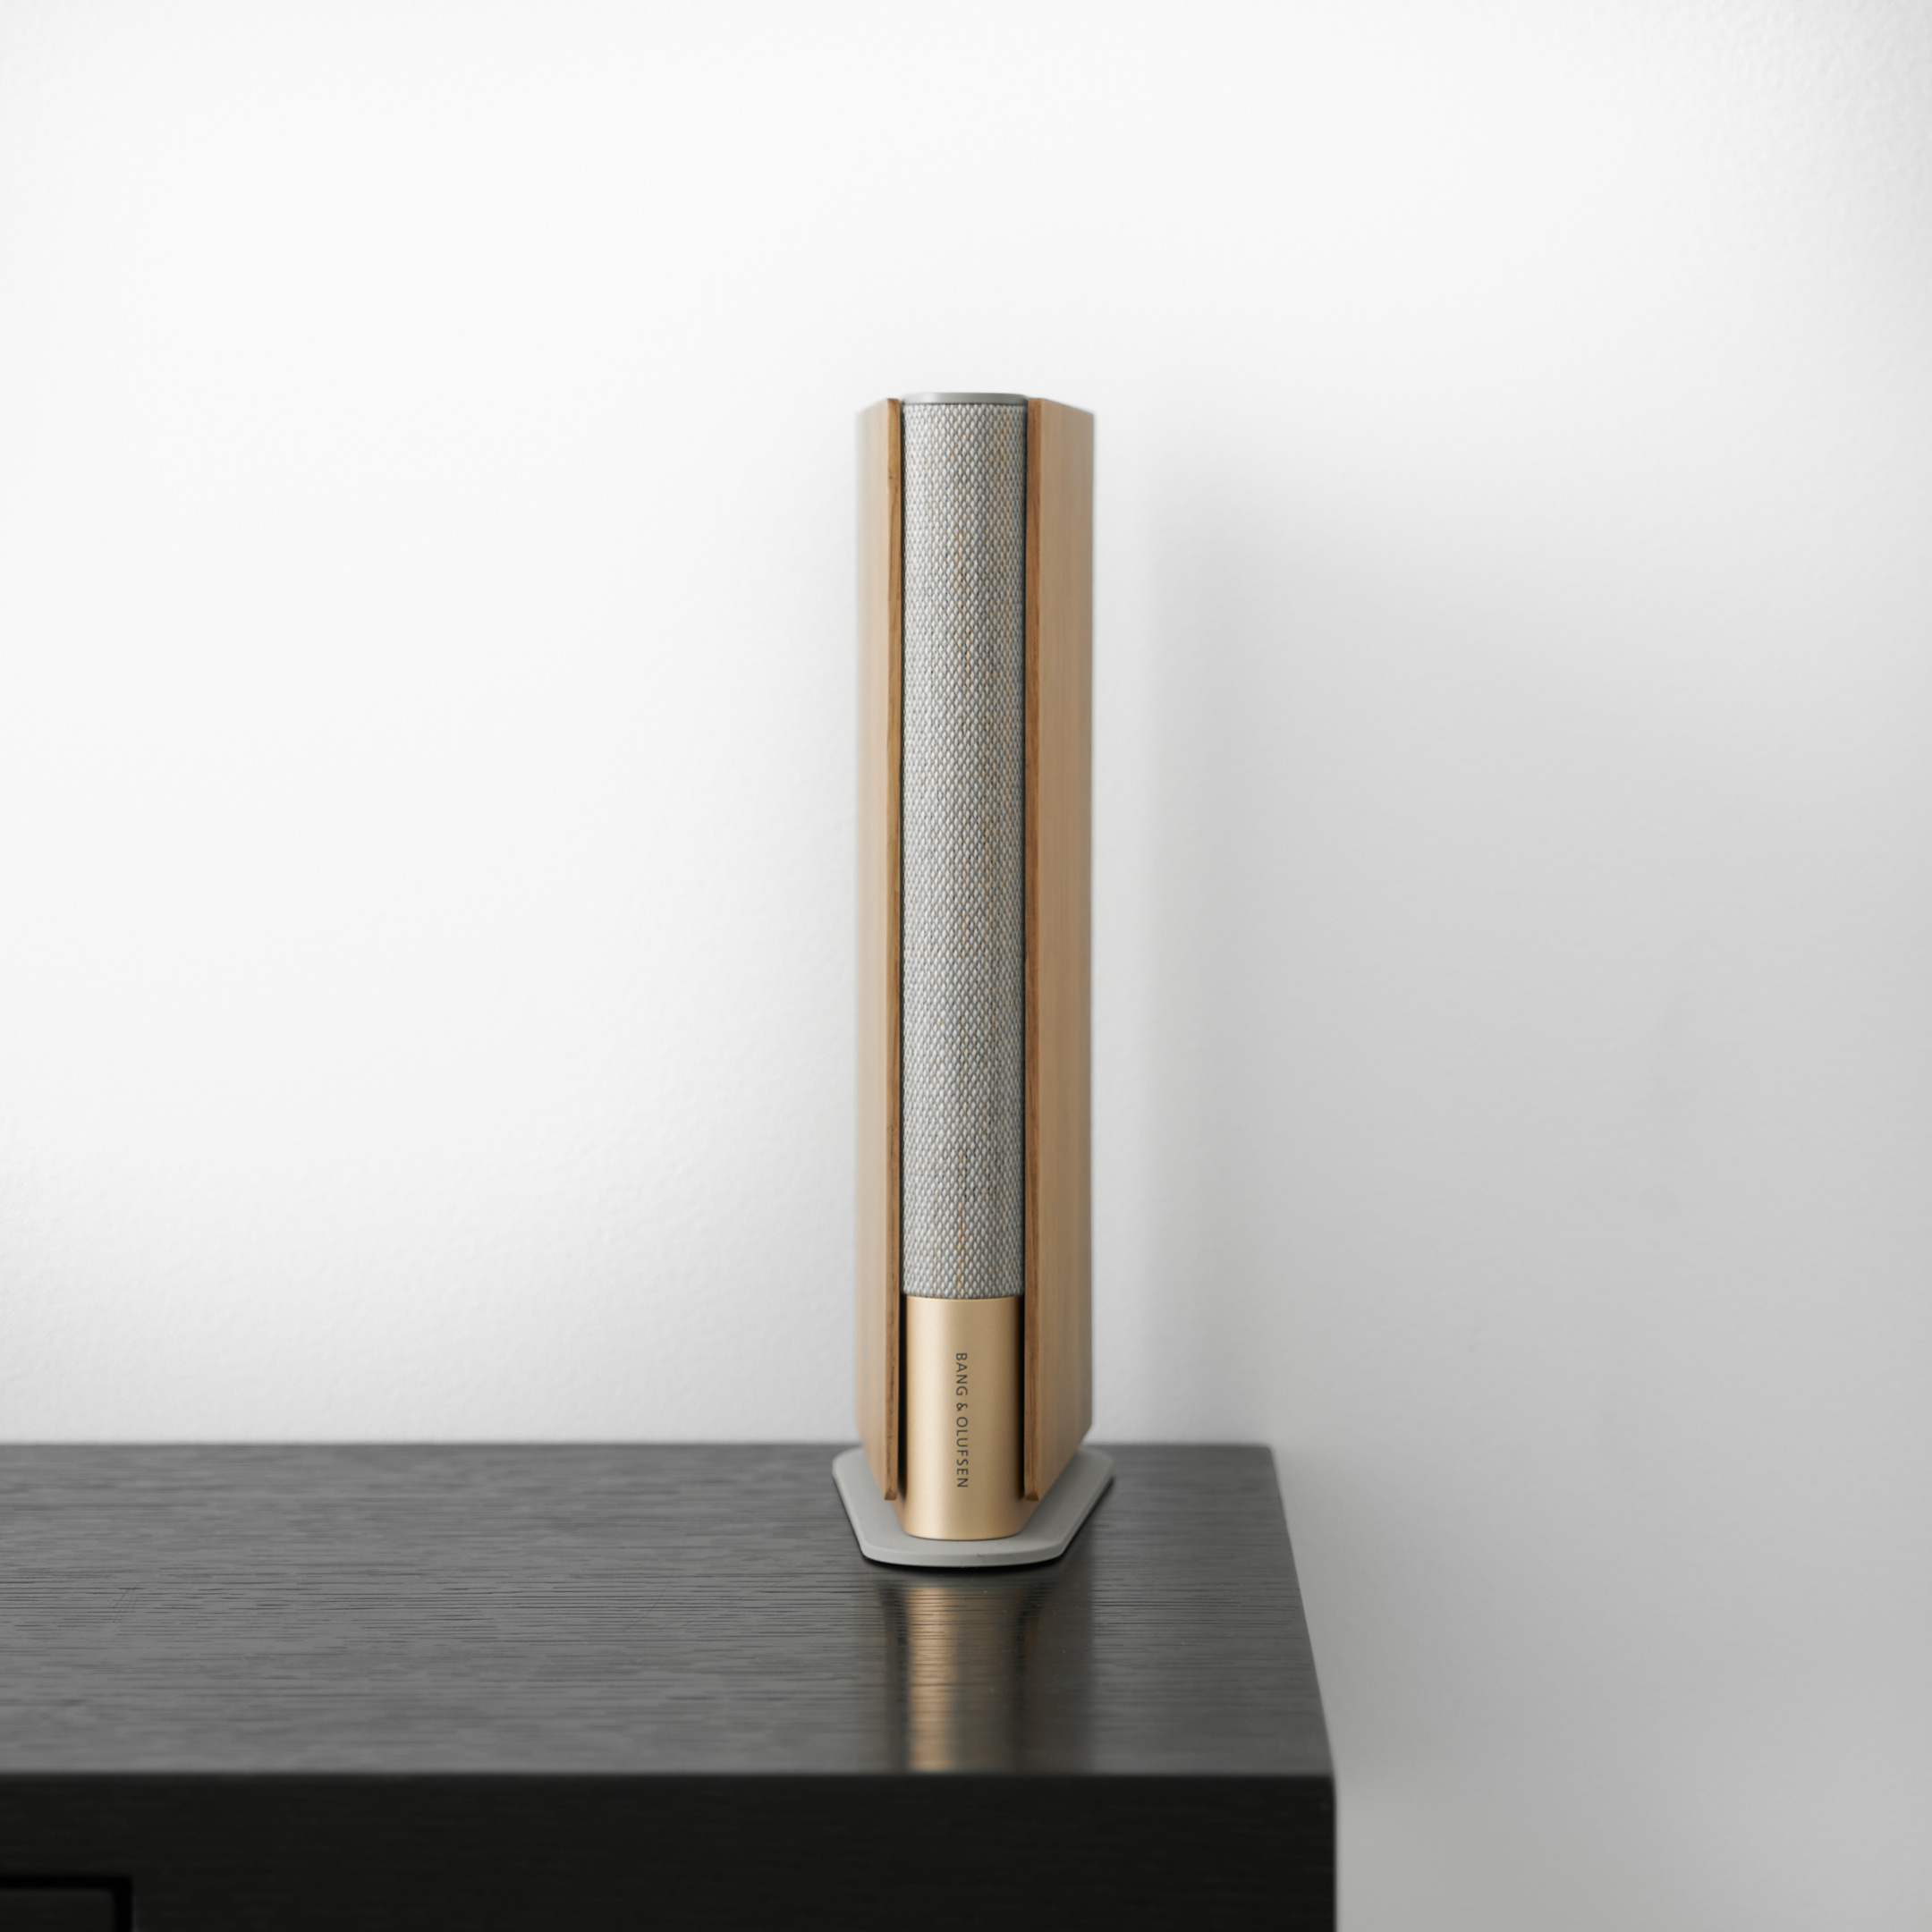 Bang & Olufsen's new wireless speaker will fit nicely on your